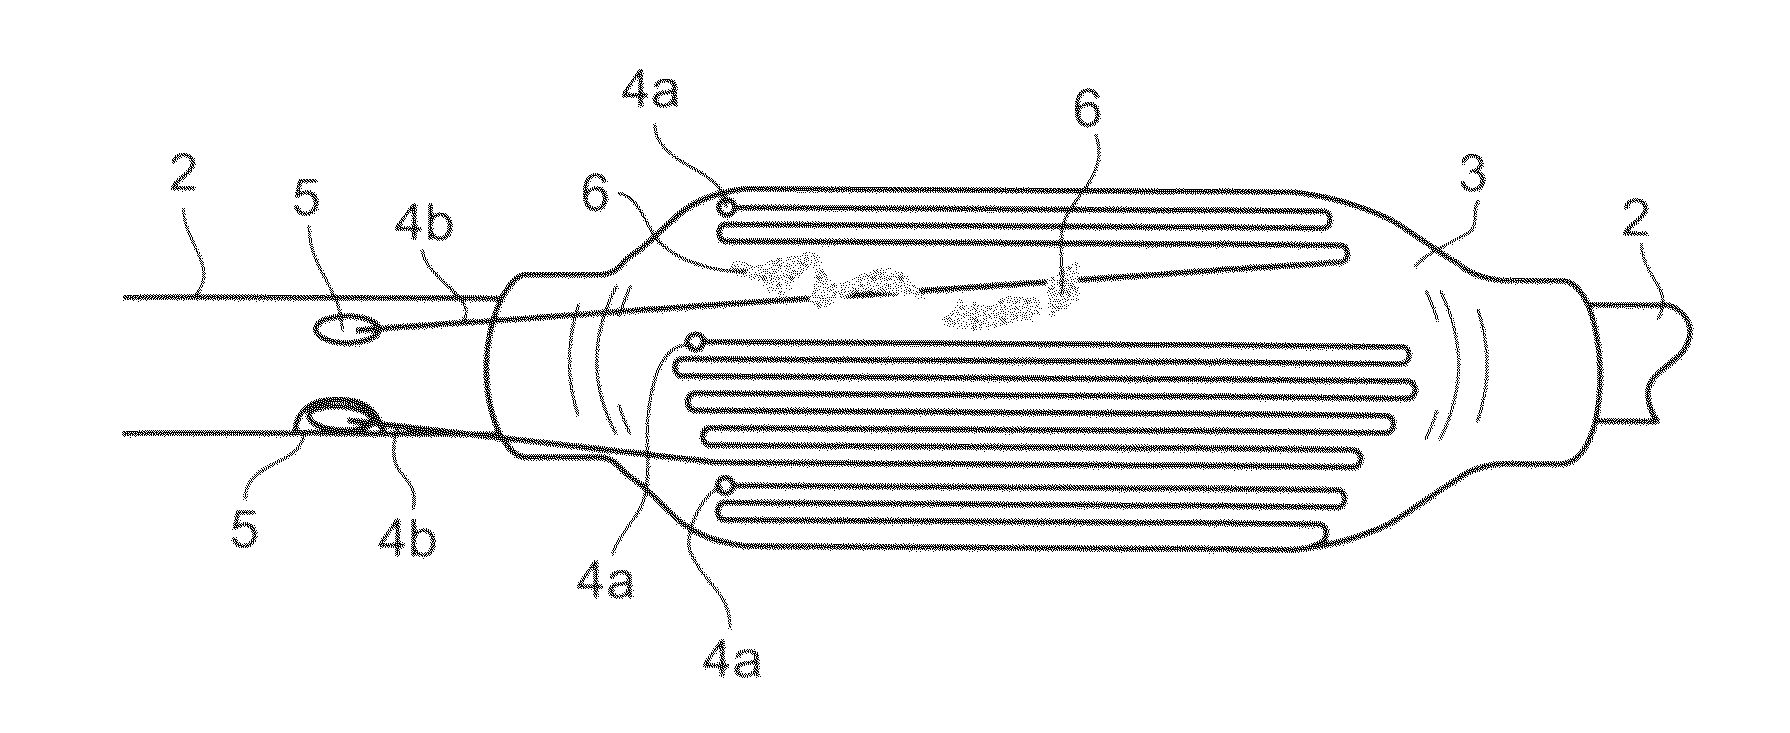 Apparatus and method for removing deposits from tubular structure, particularly atheroma from blood vessels